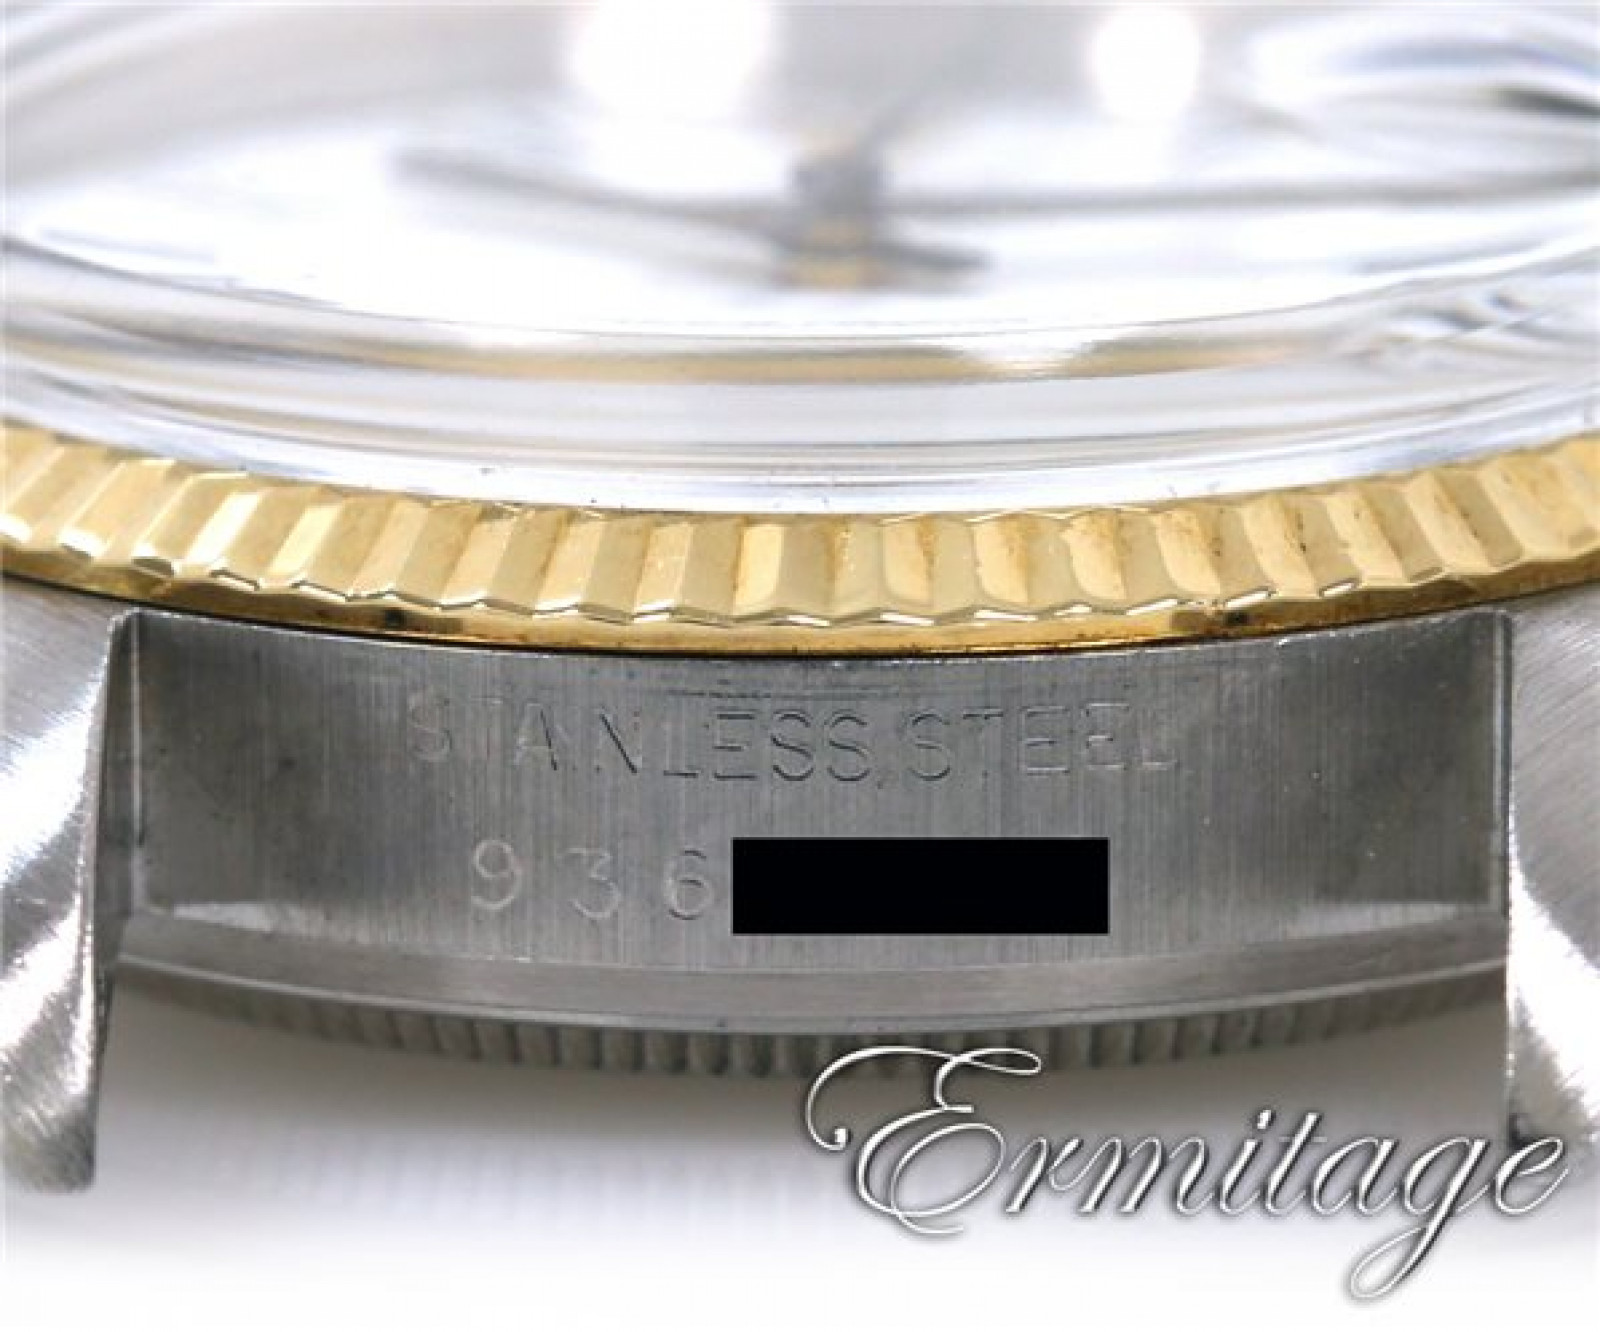 Rolex Datejust 16013 Gold & Steel with White Dial & Roman Markers